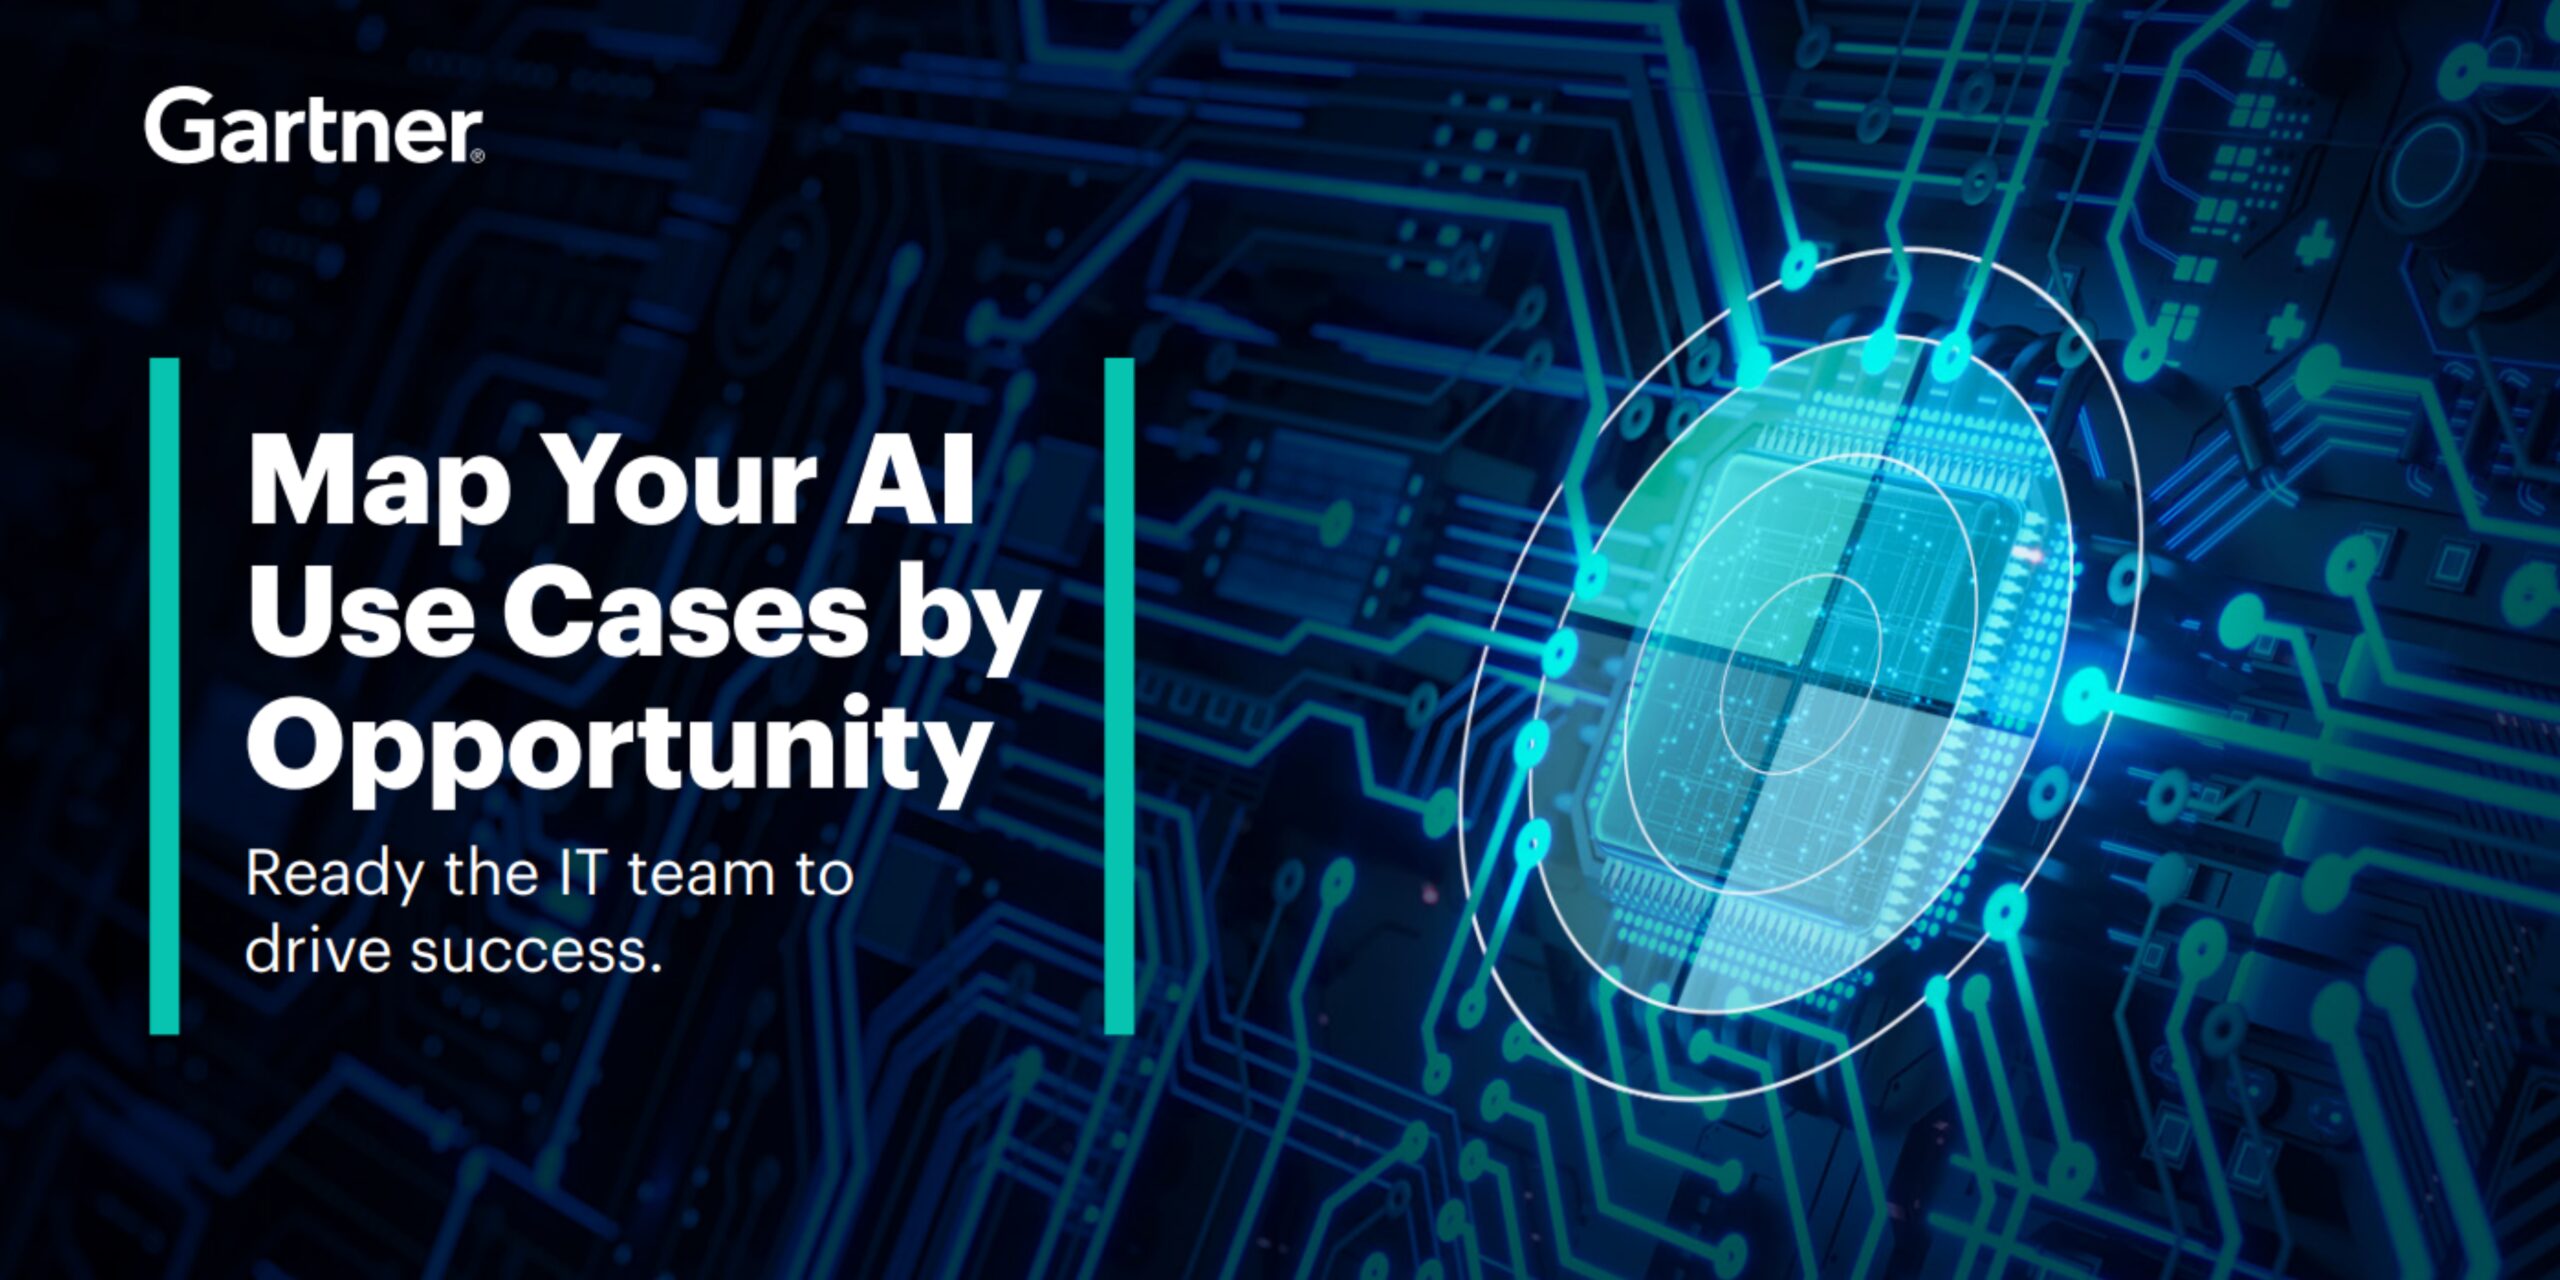 4 Key Initiatives To Get Your Enterprise AI Ready